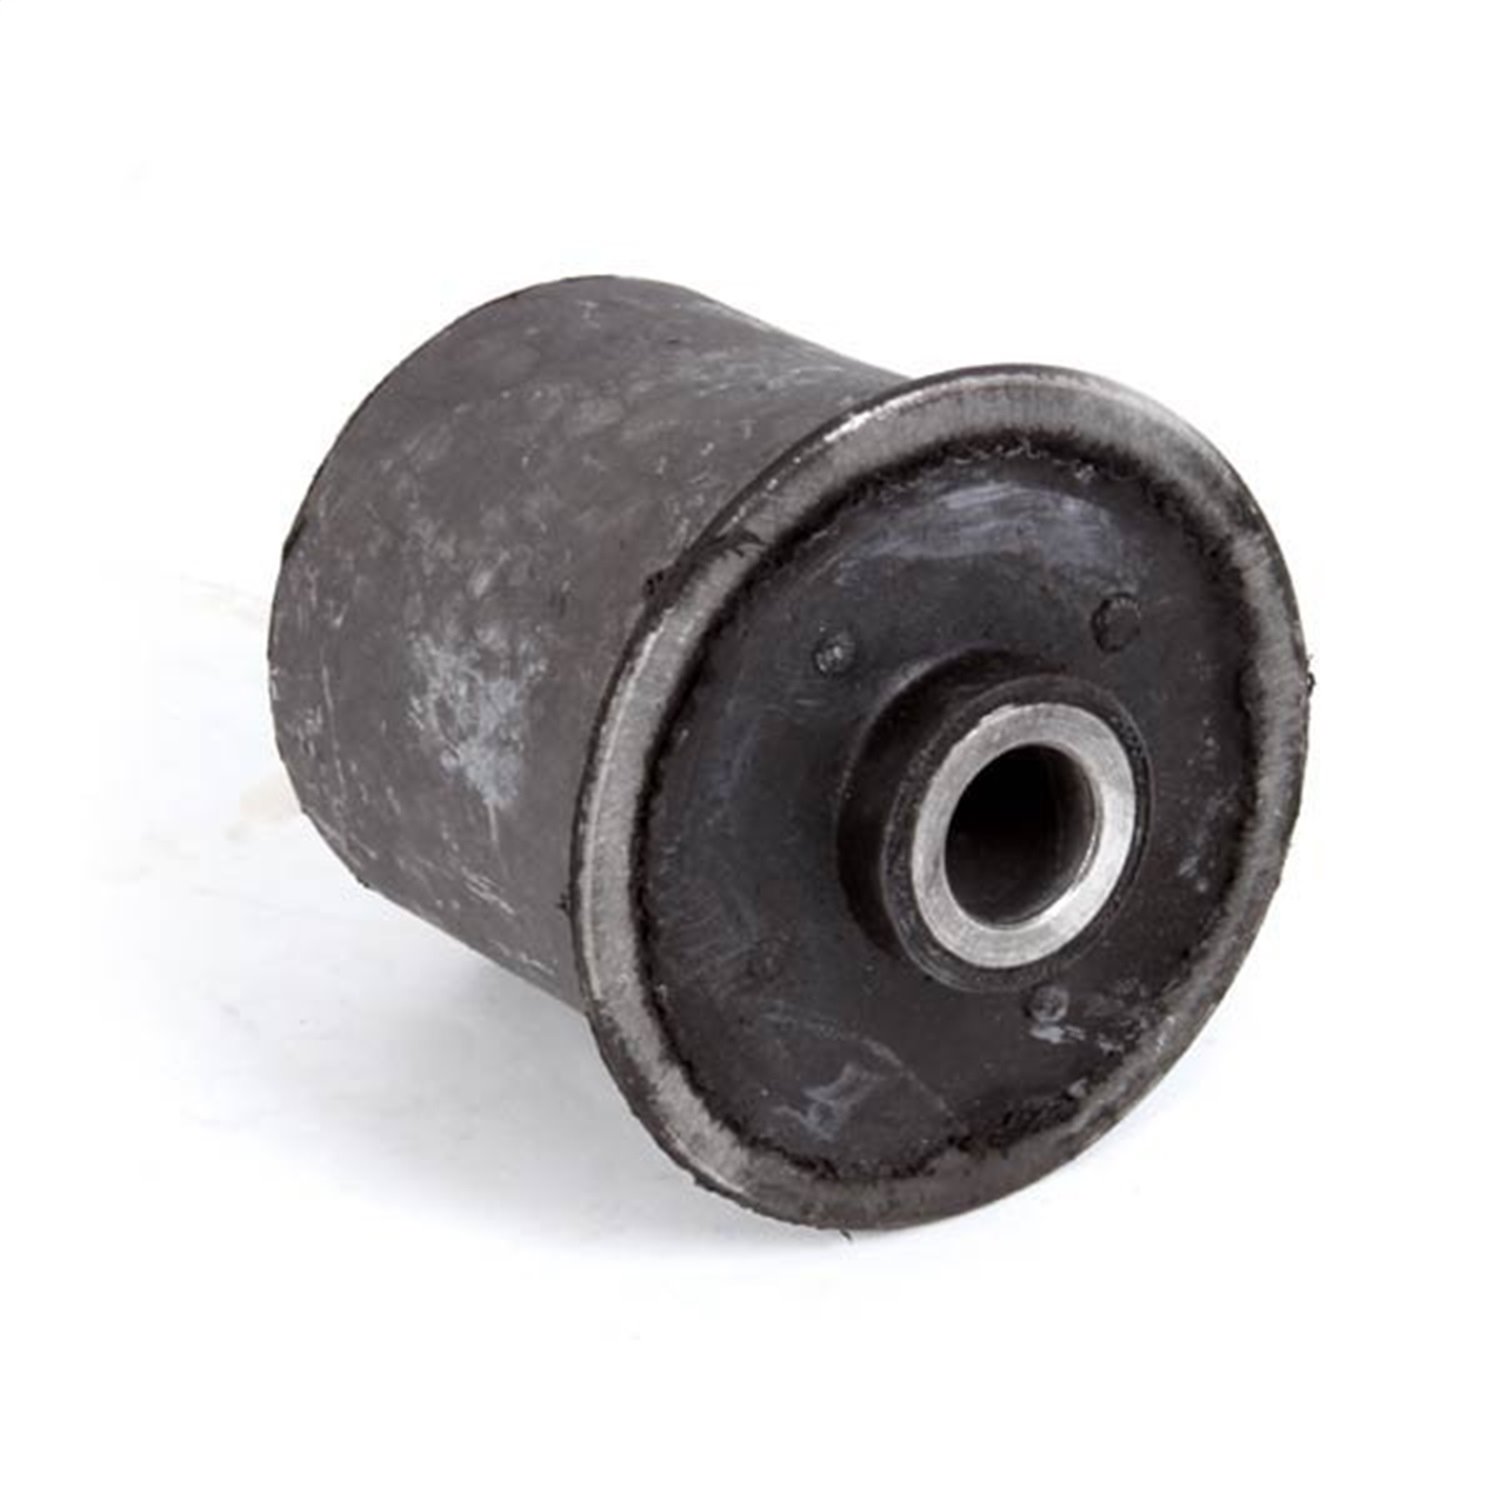 Replacement rear lower control arm bushing from Omix-ADA, Fits 04-07 Jeep Liberty KJ